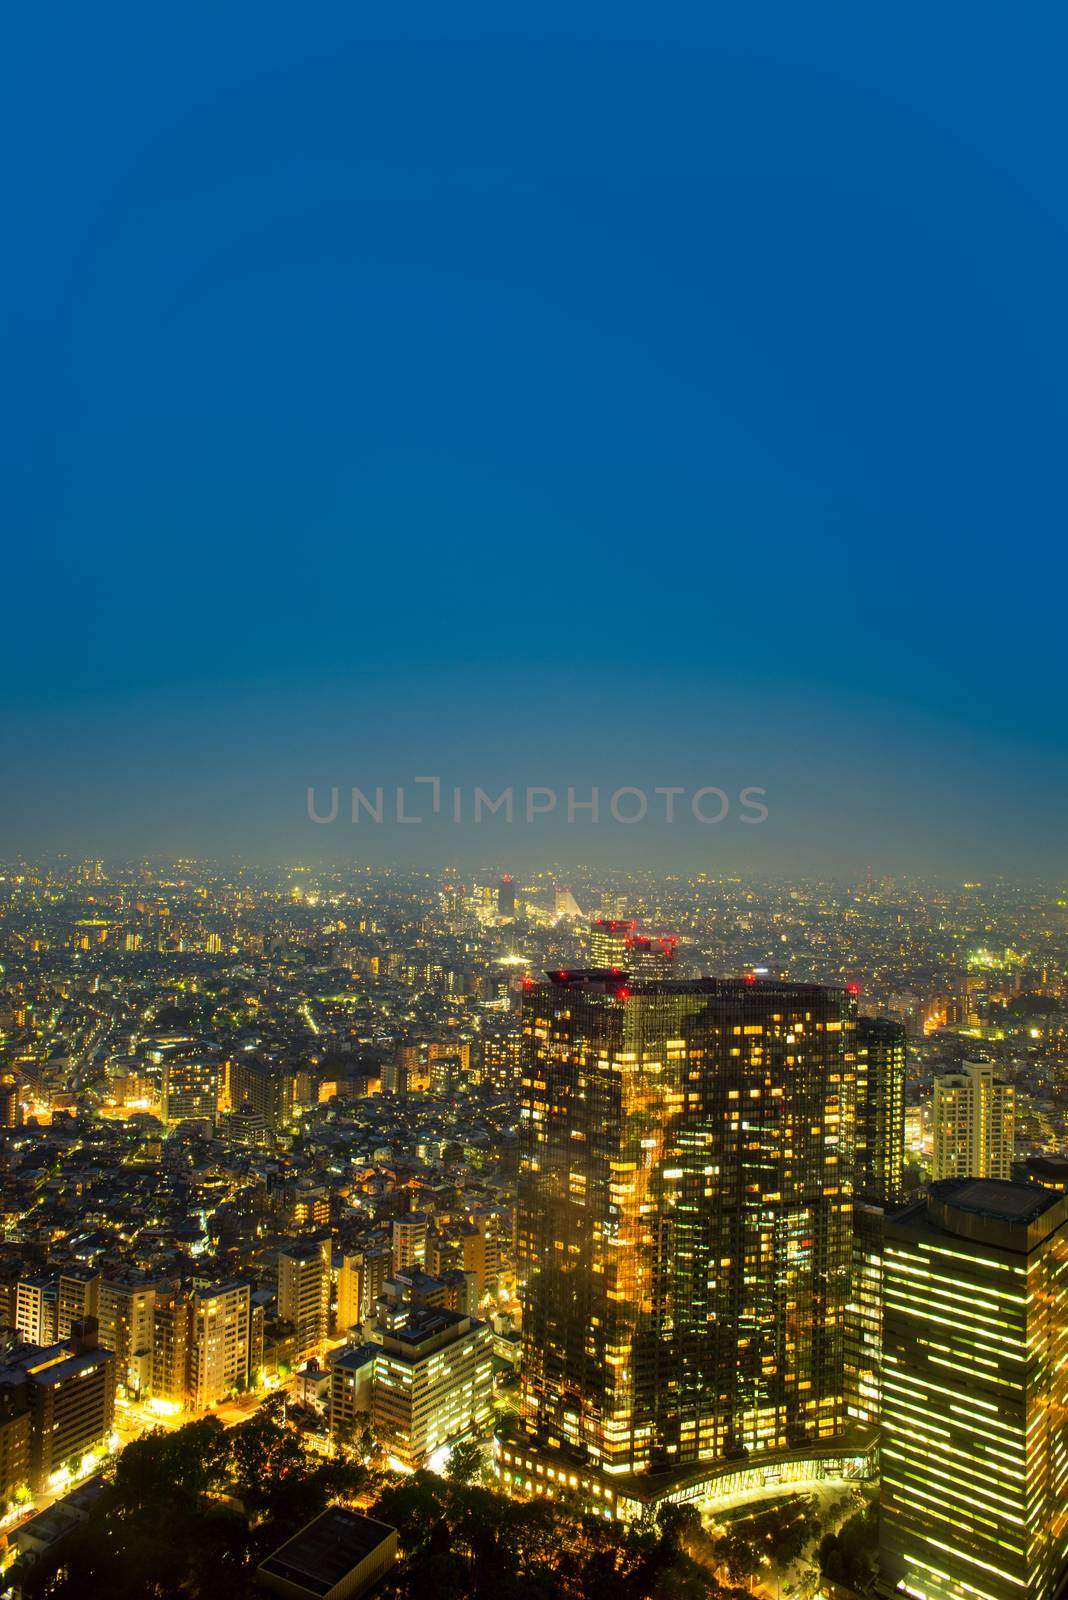  from free observator of Tokyo Metroplitan Government building by Yuri2012